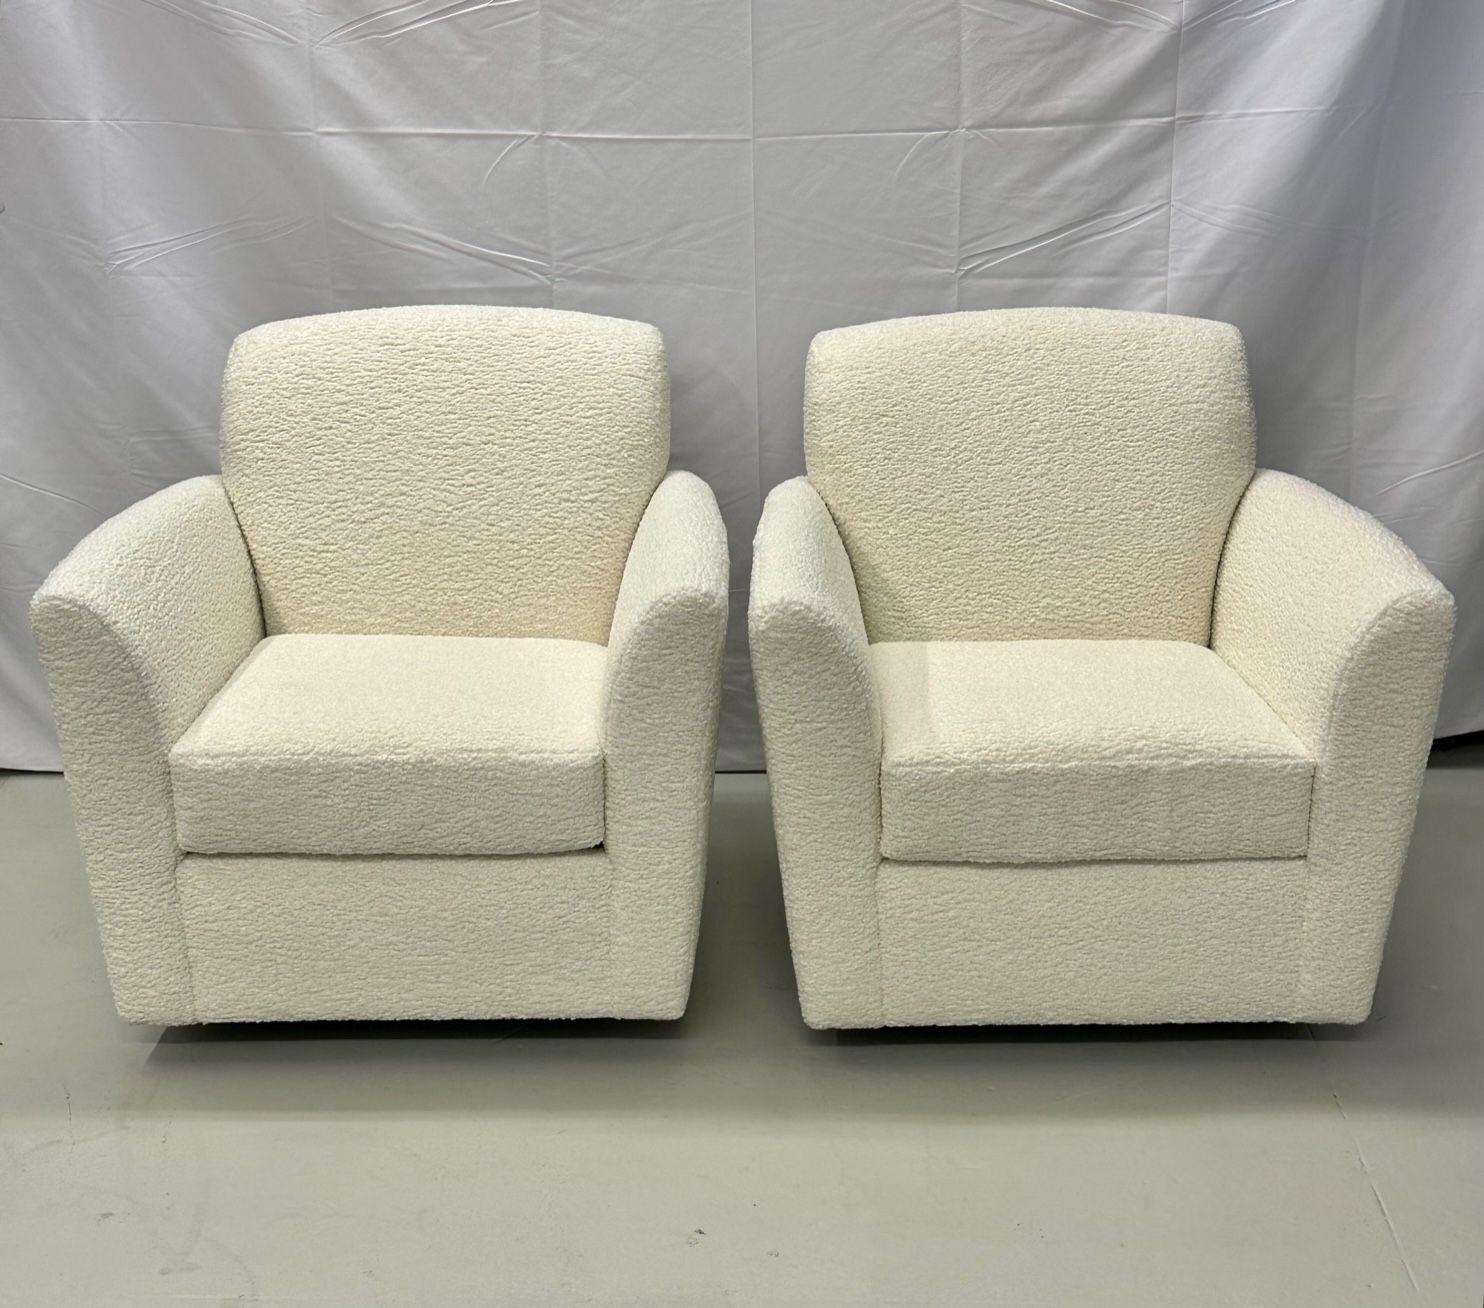 Late 20th Century Pair of Mid-Century Modern Square White Boucle Rocking Lounge / Swivel Chairs For Sale